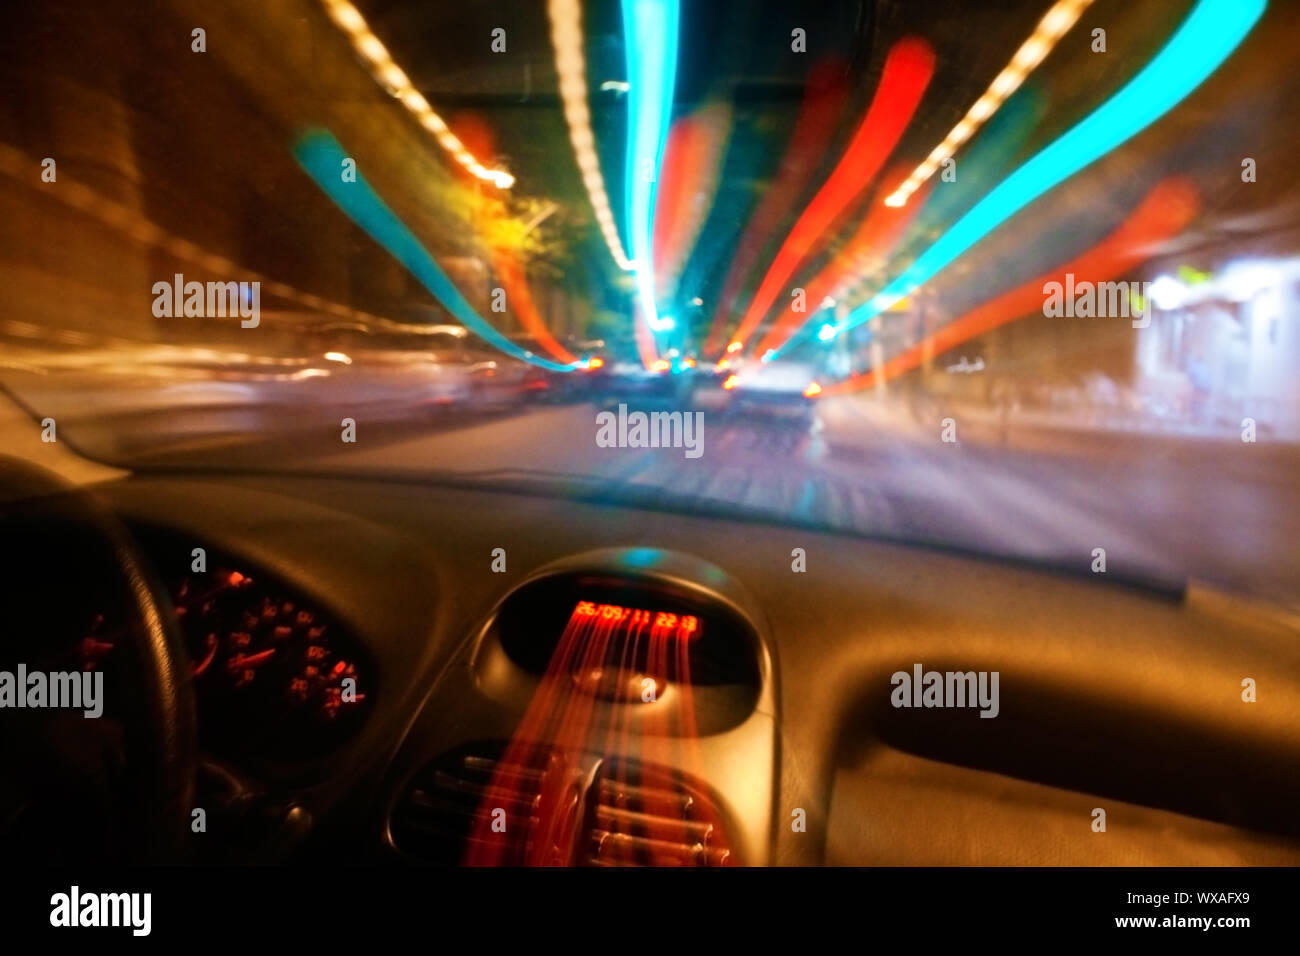 Abstract image of Car speed concept Stock Photo